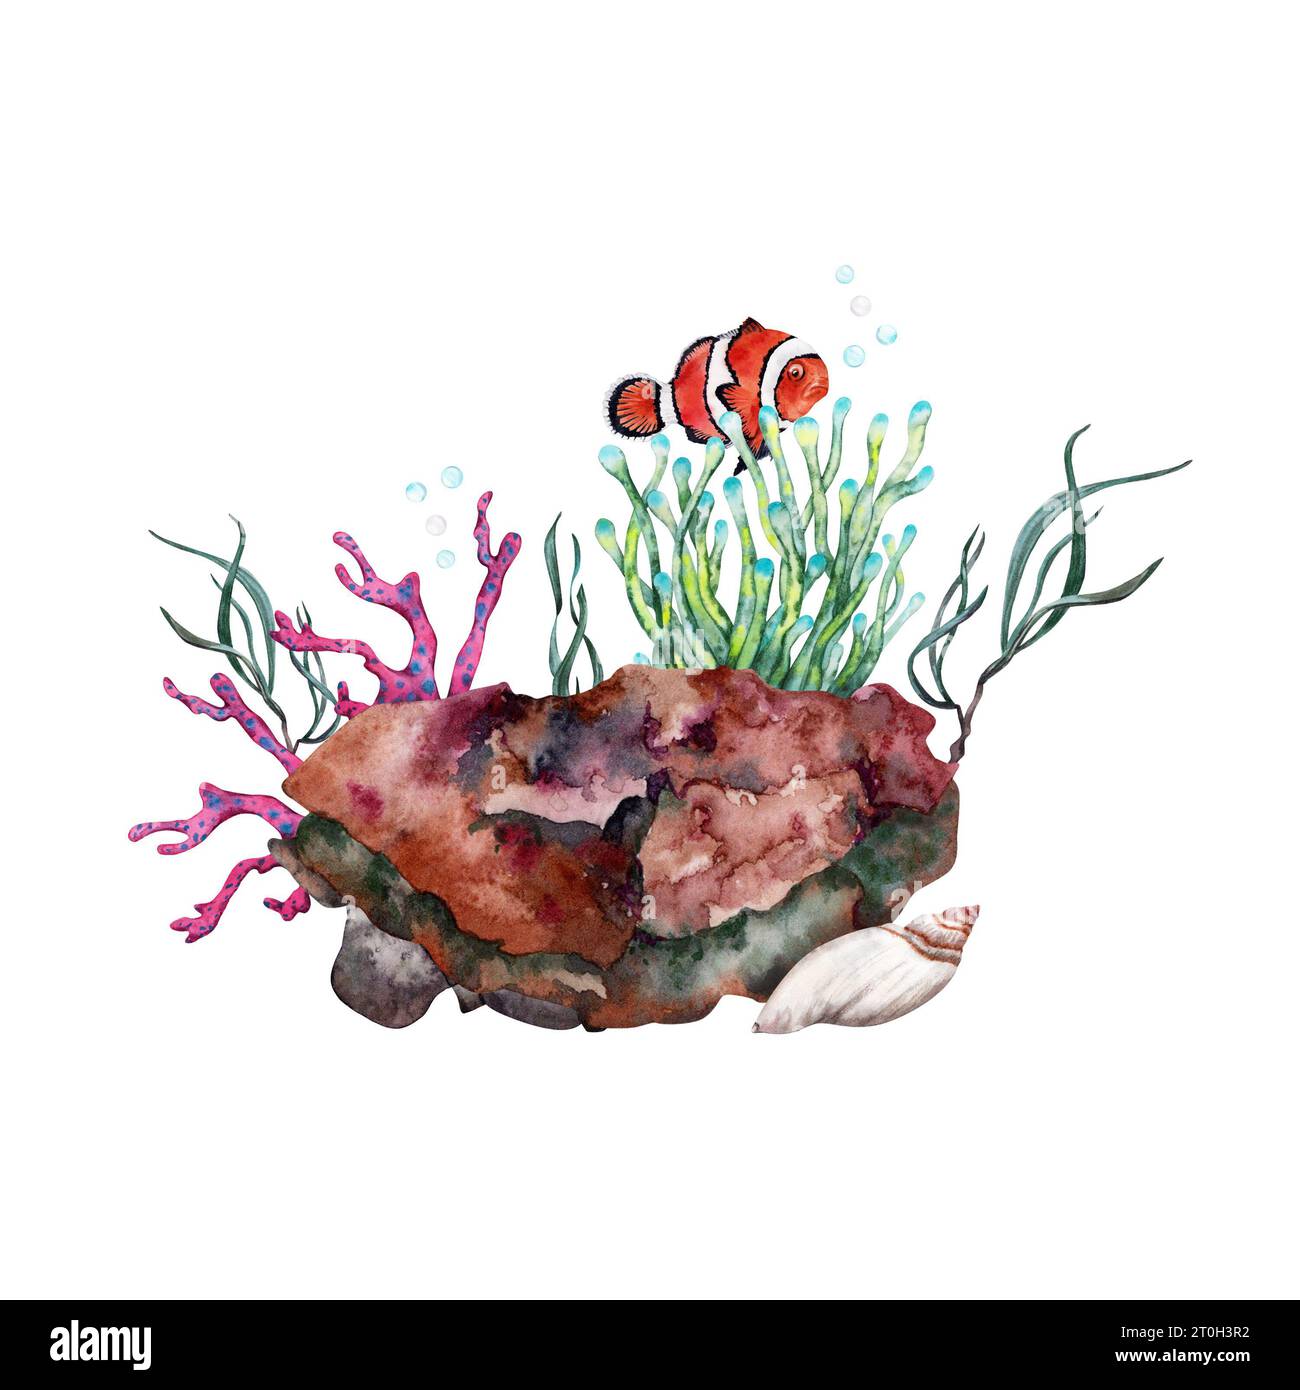 Orange clown fish near anemone growing over reef rock with corals and seaweed. Hand drawn watercolor illustration composition on white background Stock Photo